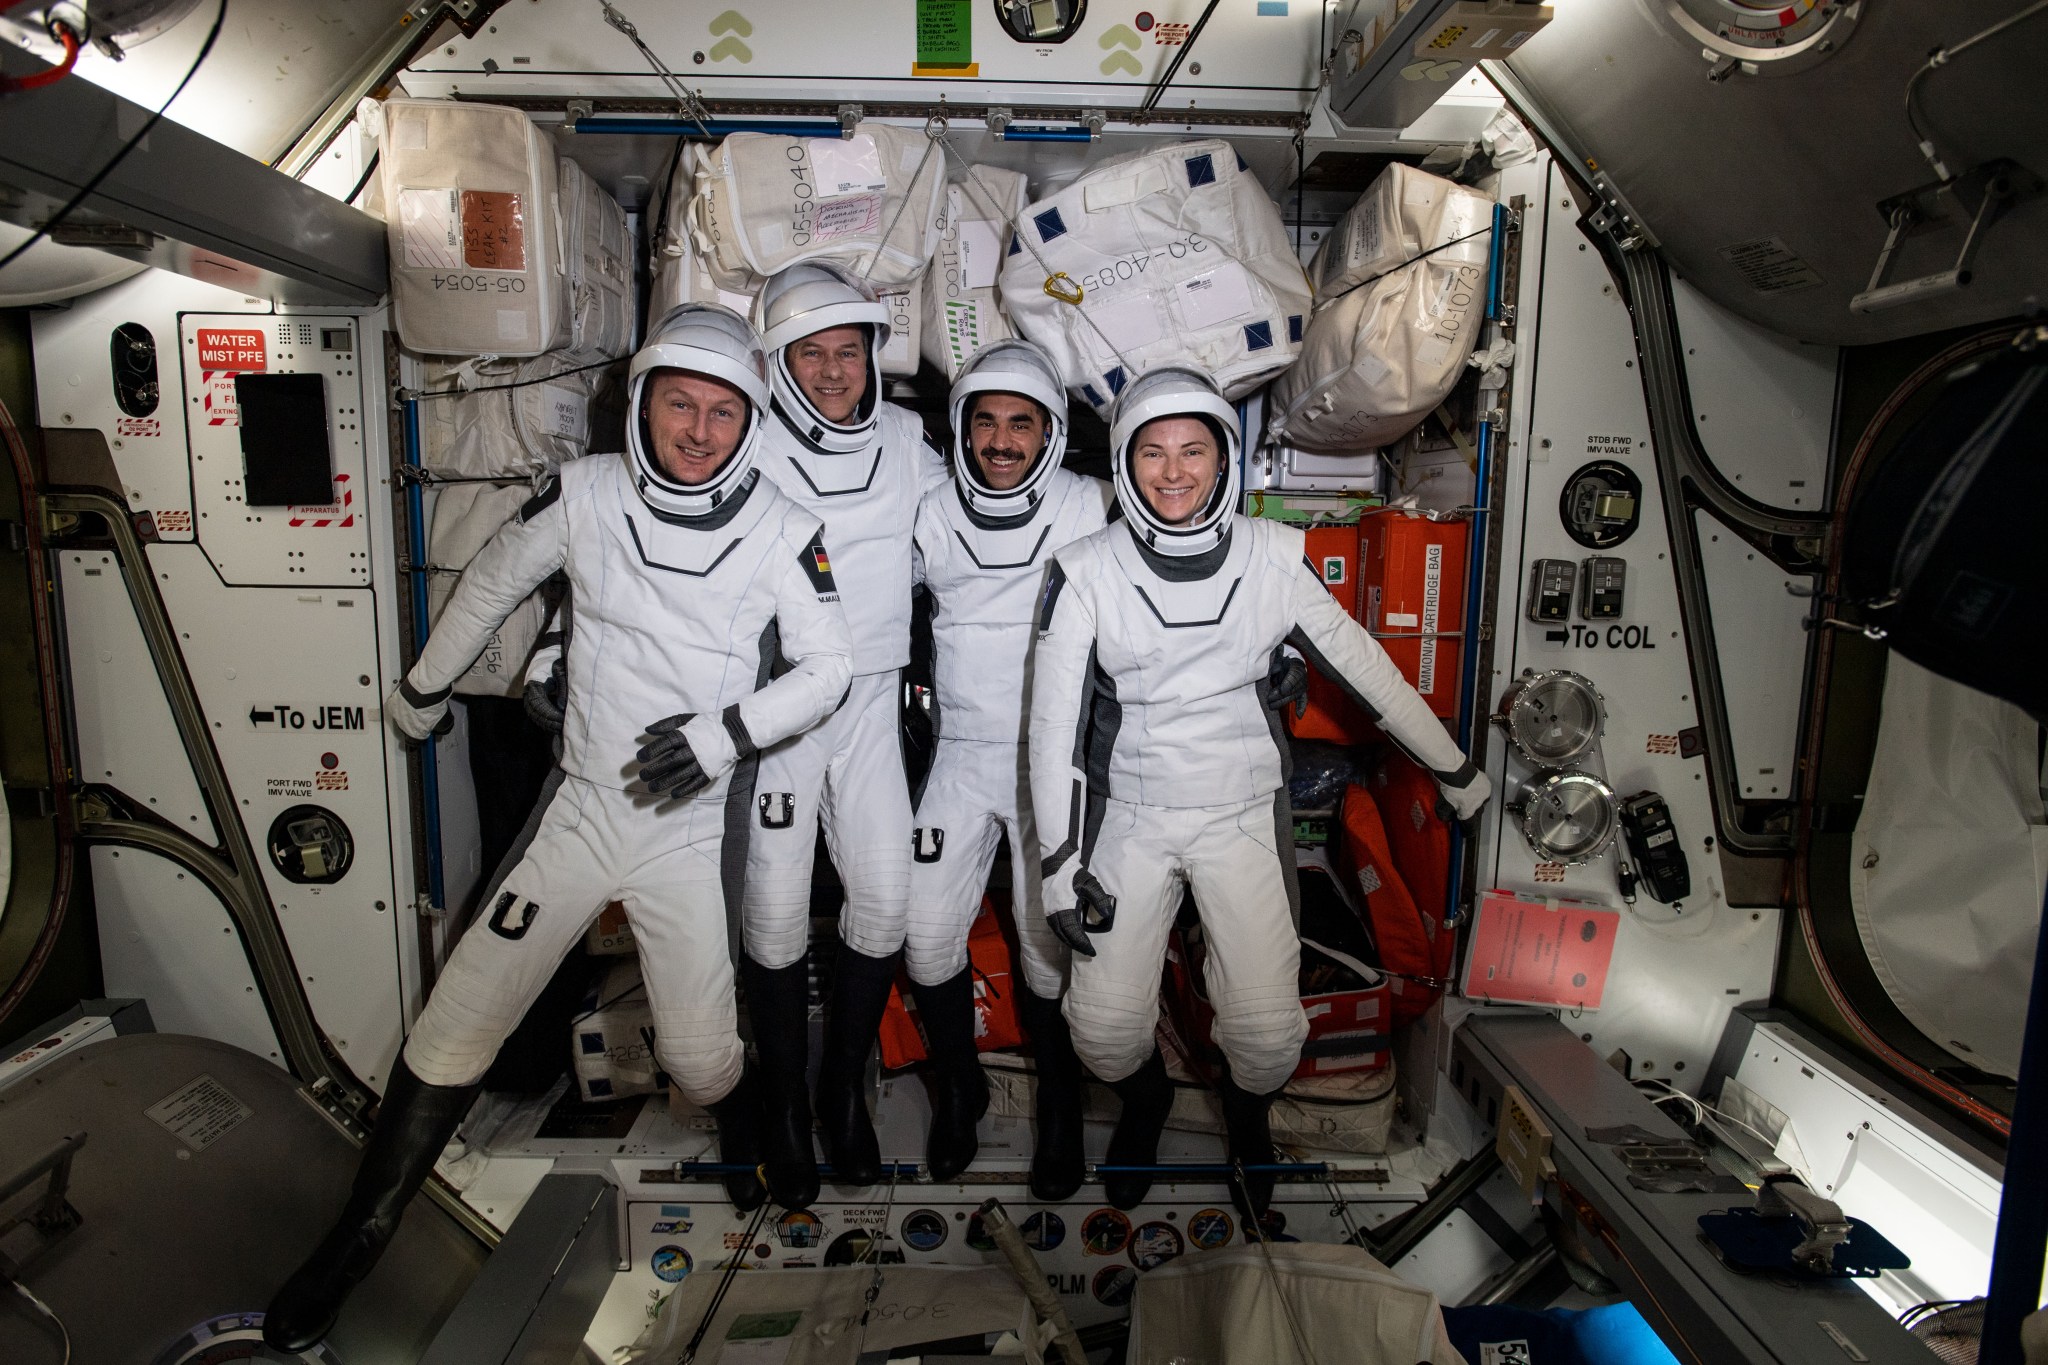 The four commercial crew astronauts representing the SpaceX Crew-3 mission are pictured. From left, are ESA (European Space Agency) astronaut Matthias Maurer, and NASA astronauts Tom Marshburn, Raja Chari, and Kayla Barron.